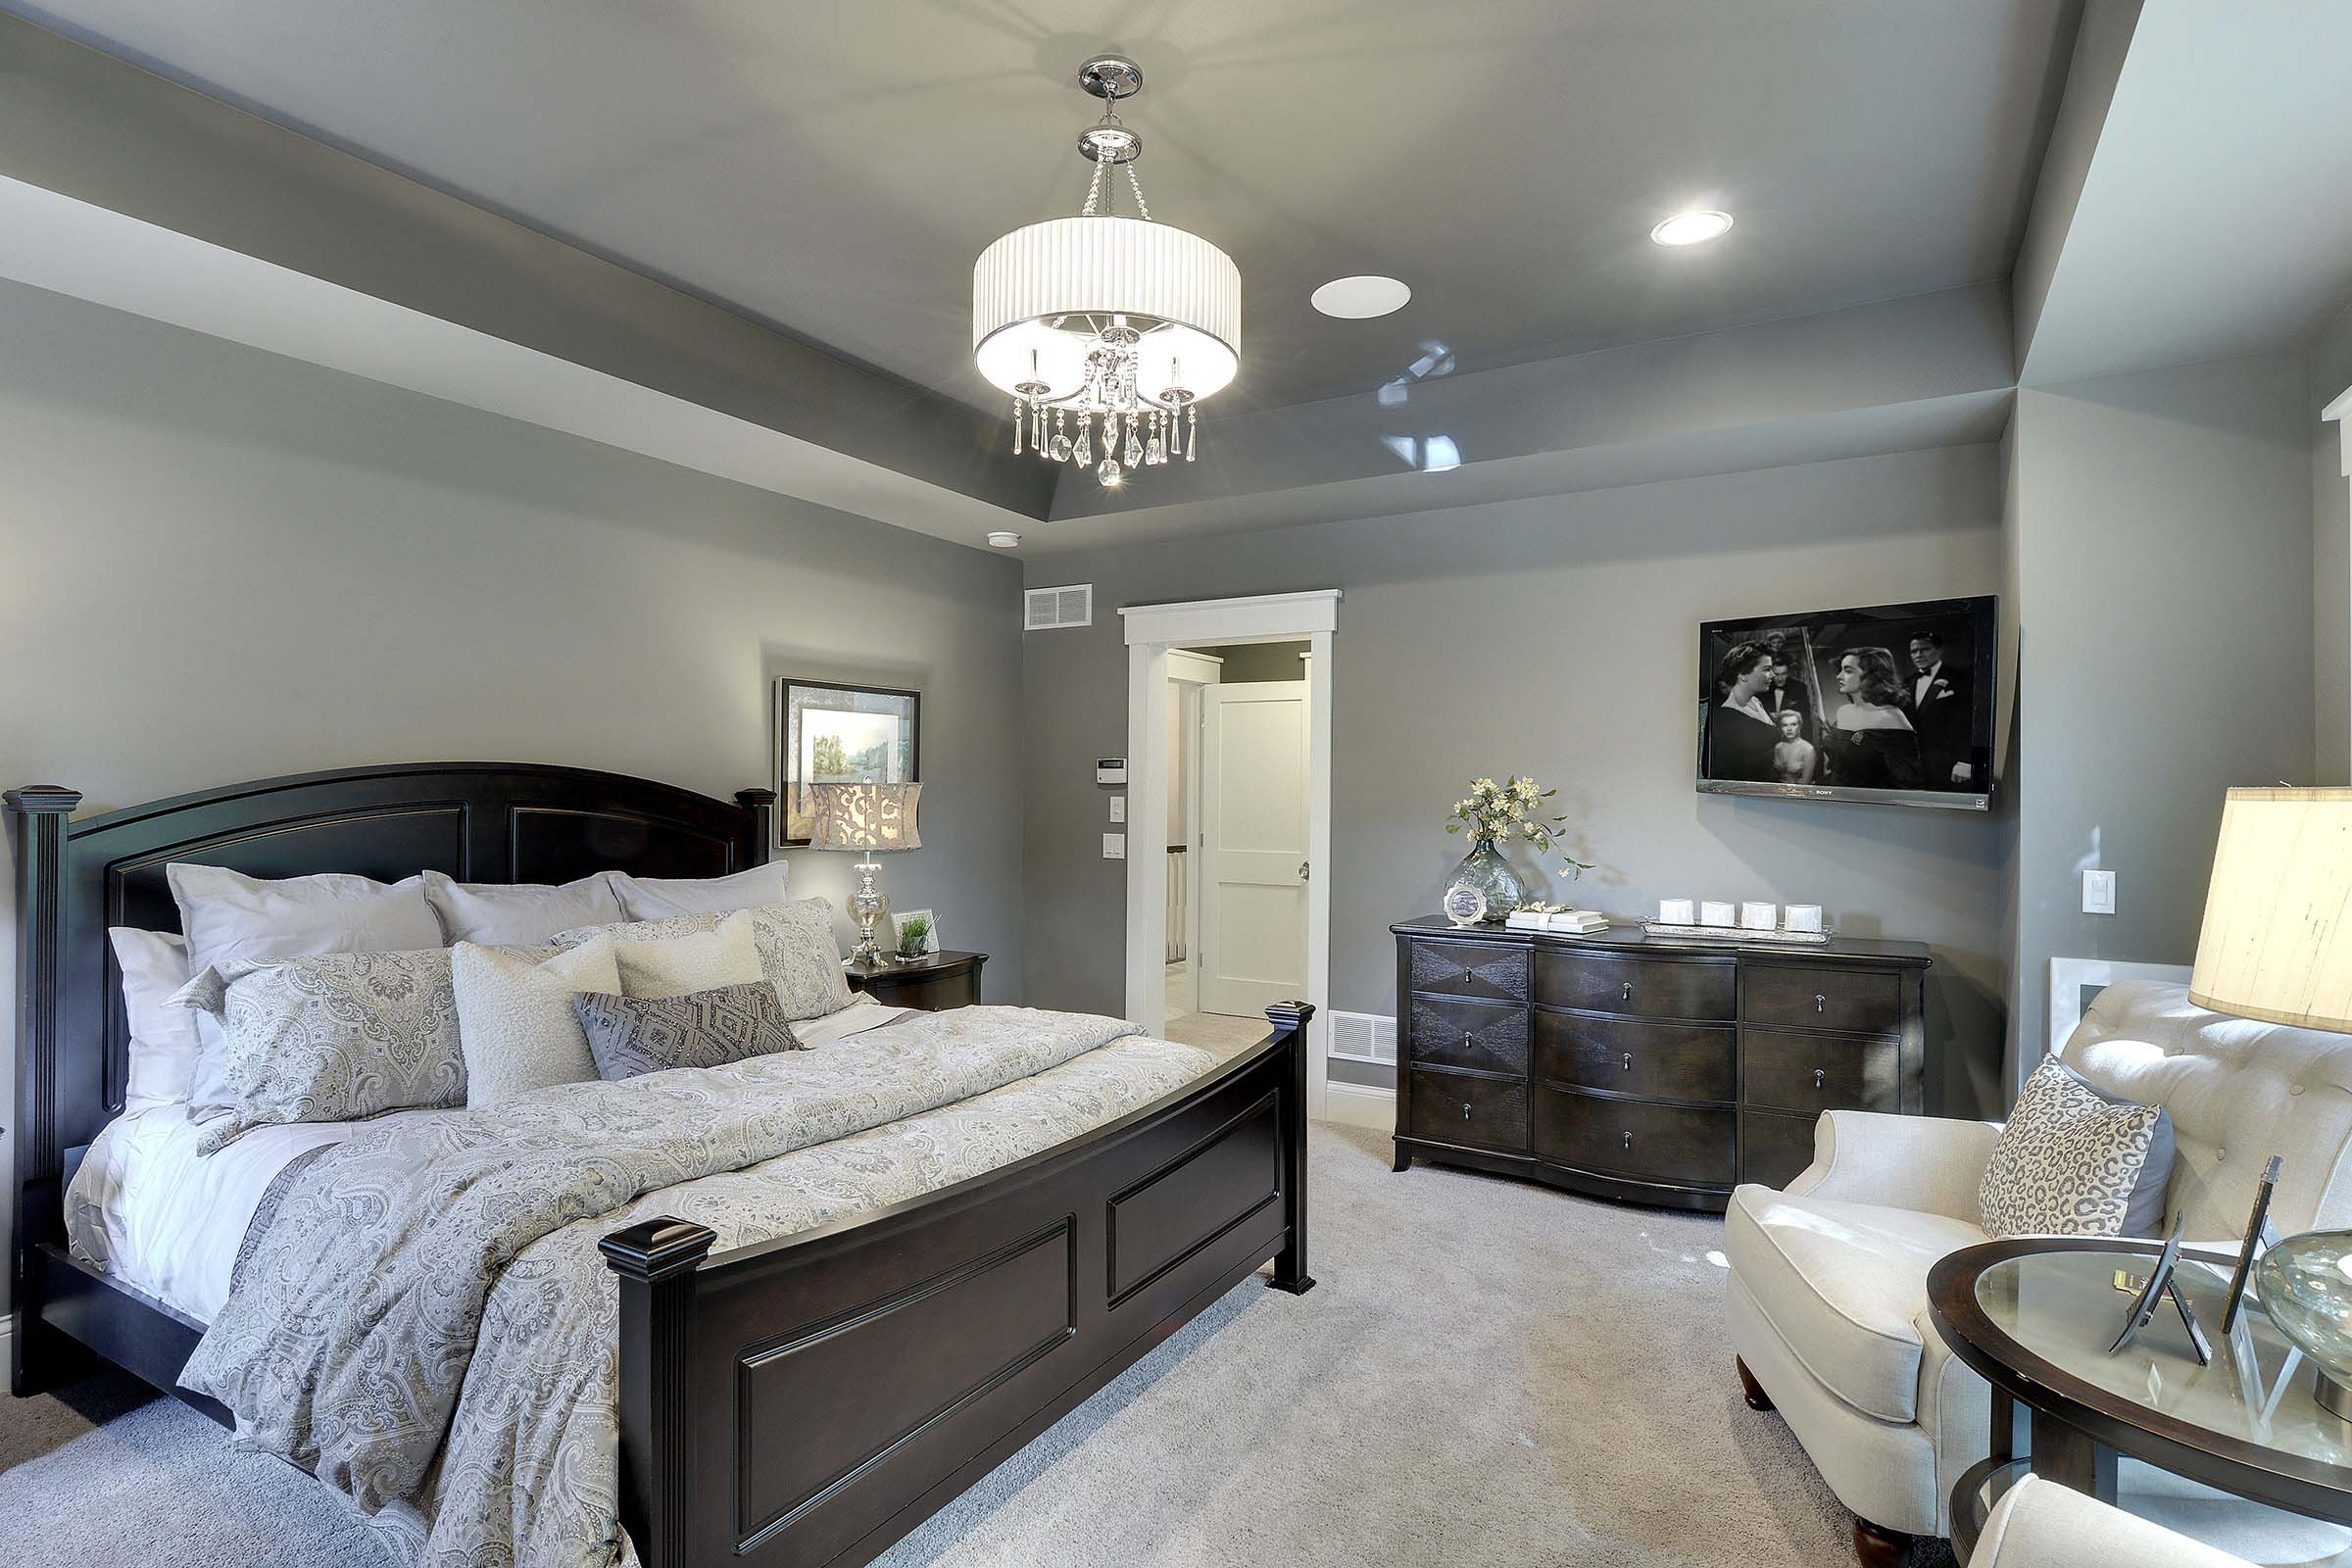 A bedroom with a bed, dresser, and a chandelier.